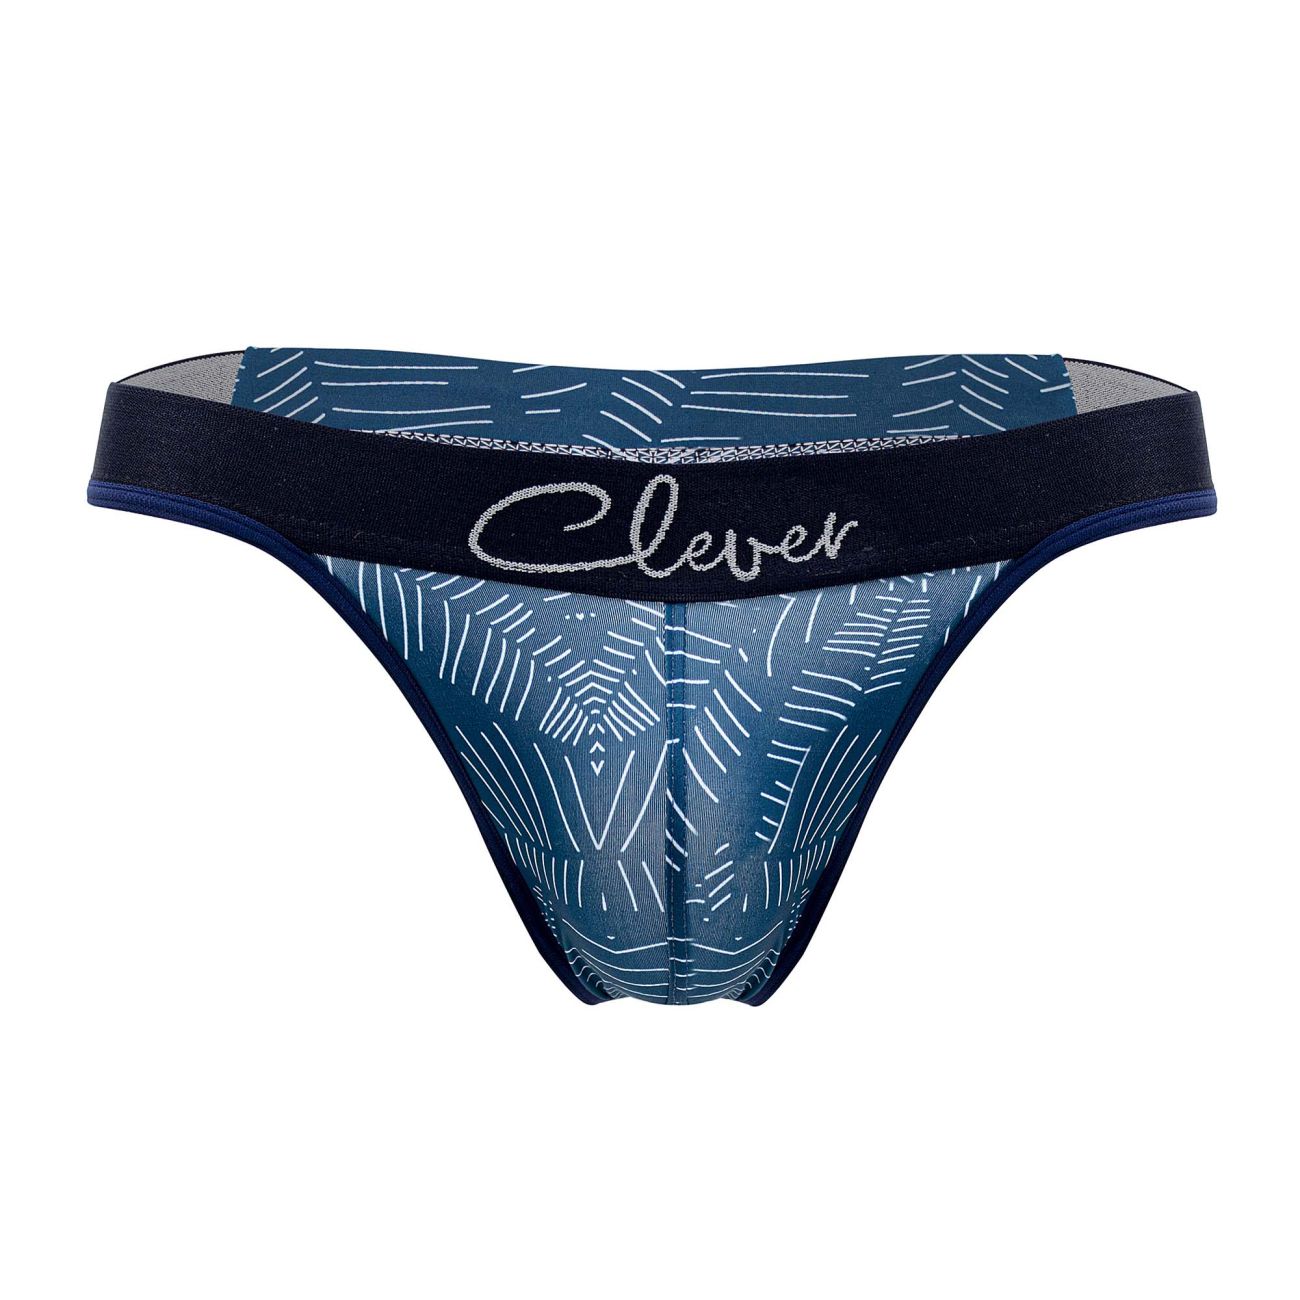 Clever 1416 Lush Thongs